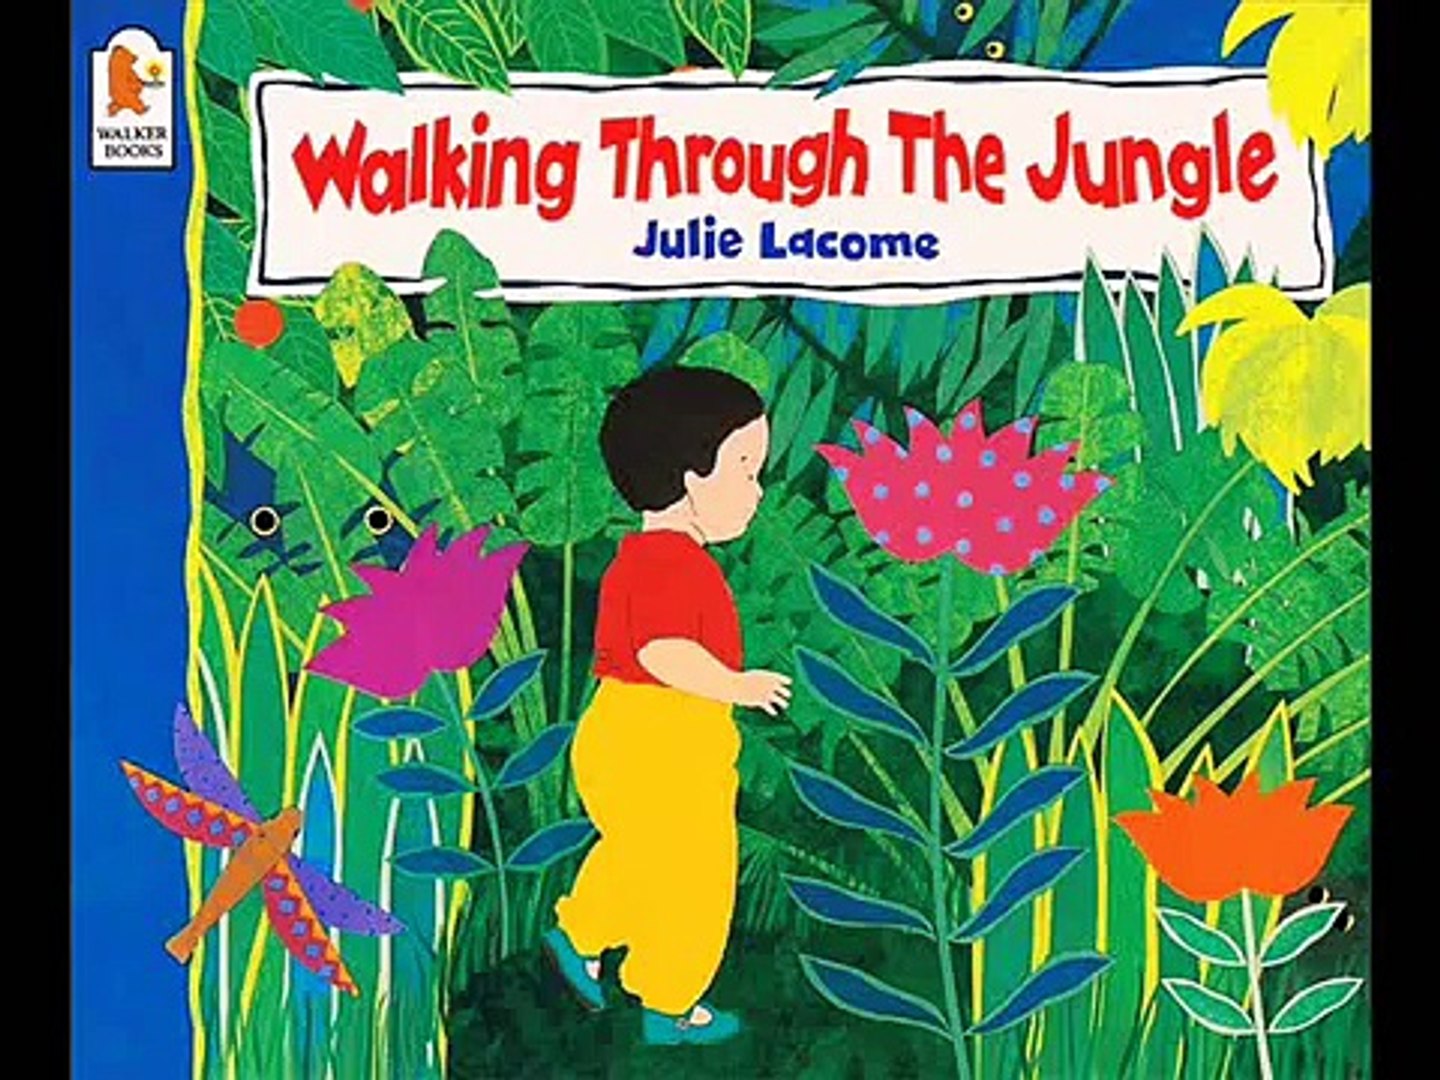 Walking Through the Jungle Julie Lacome - video Dailymotion